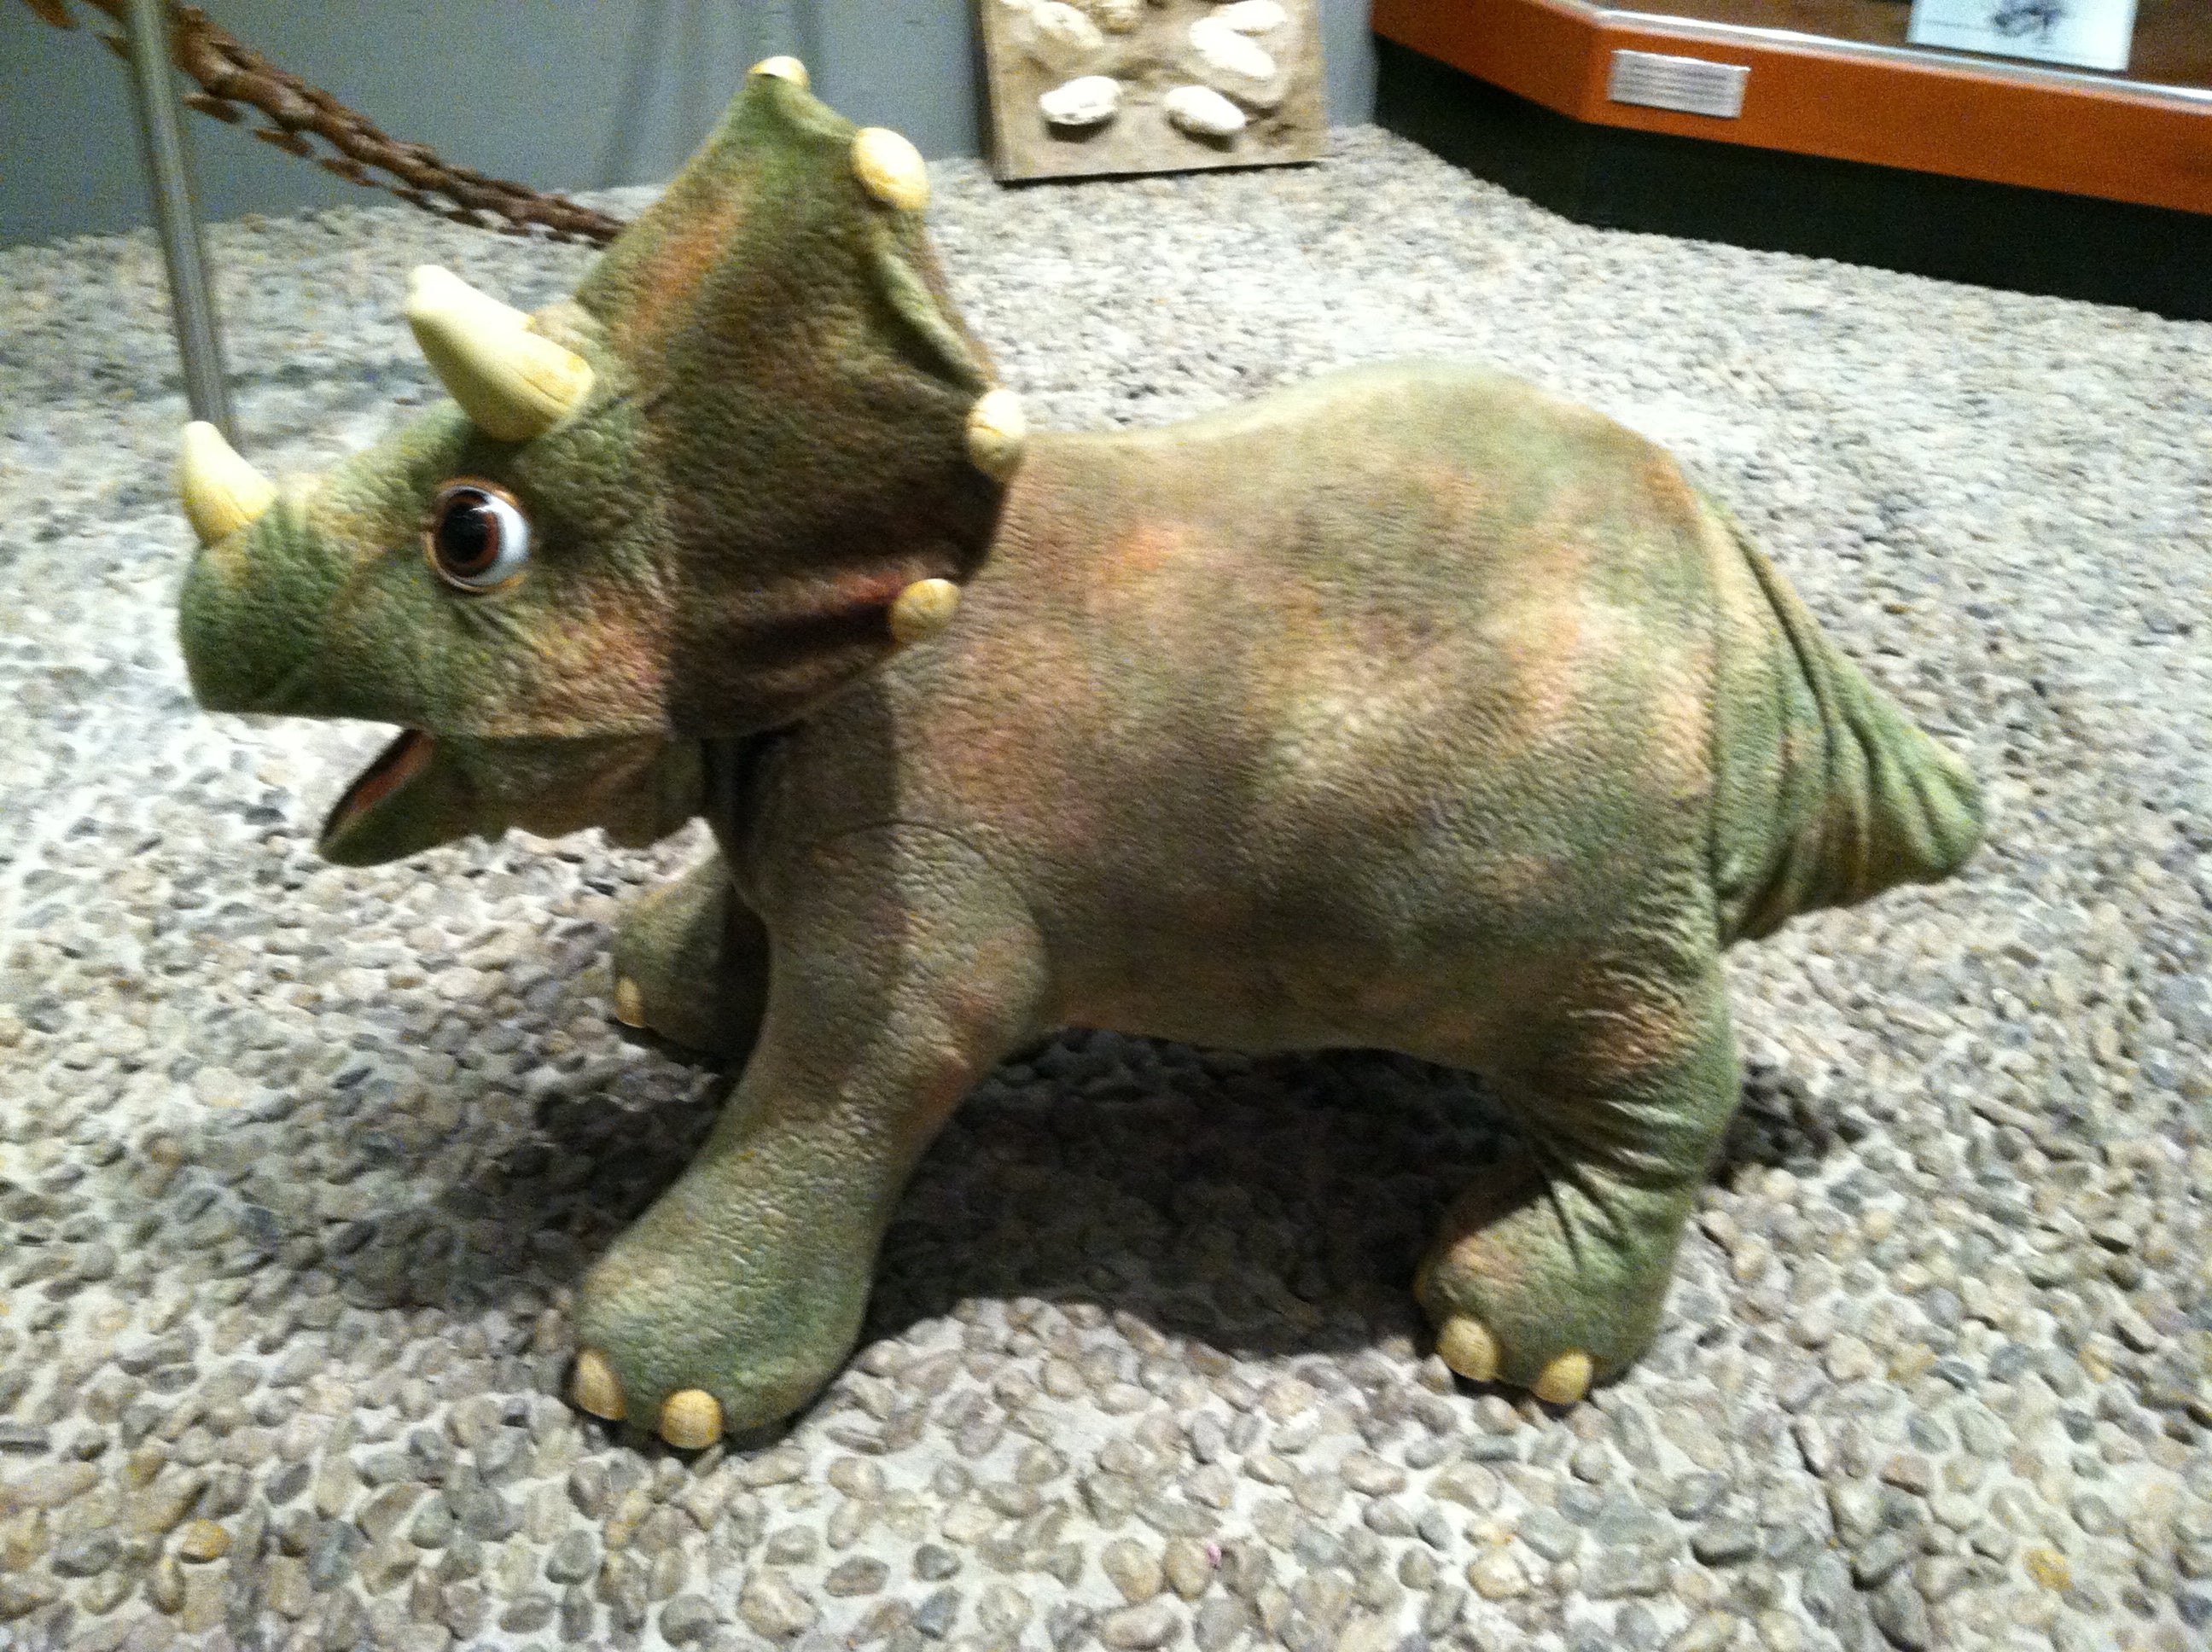 Triceratops toy